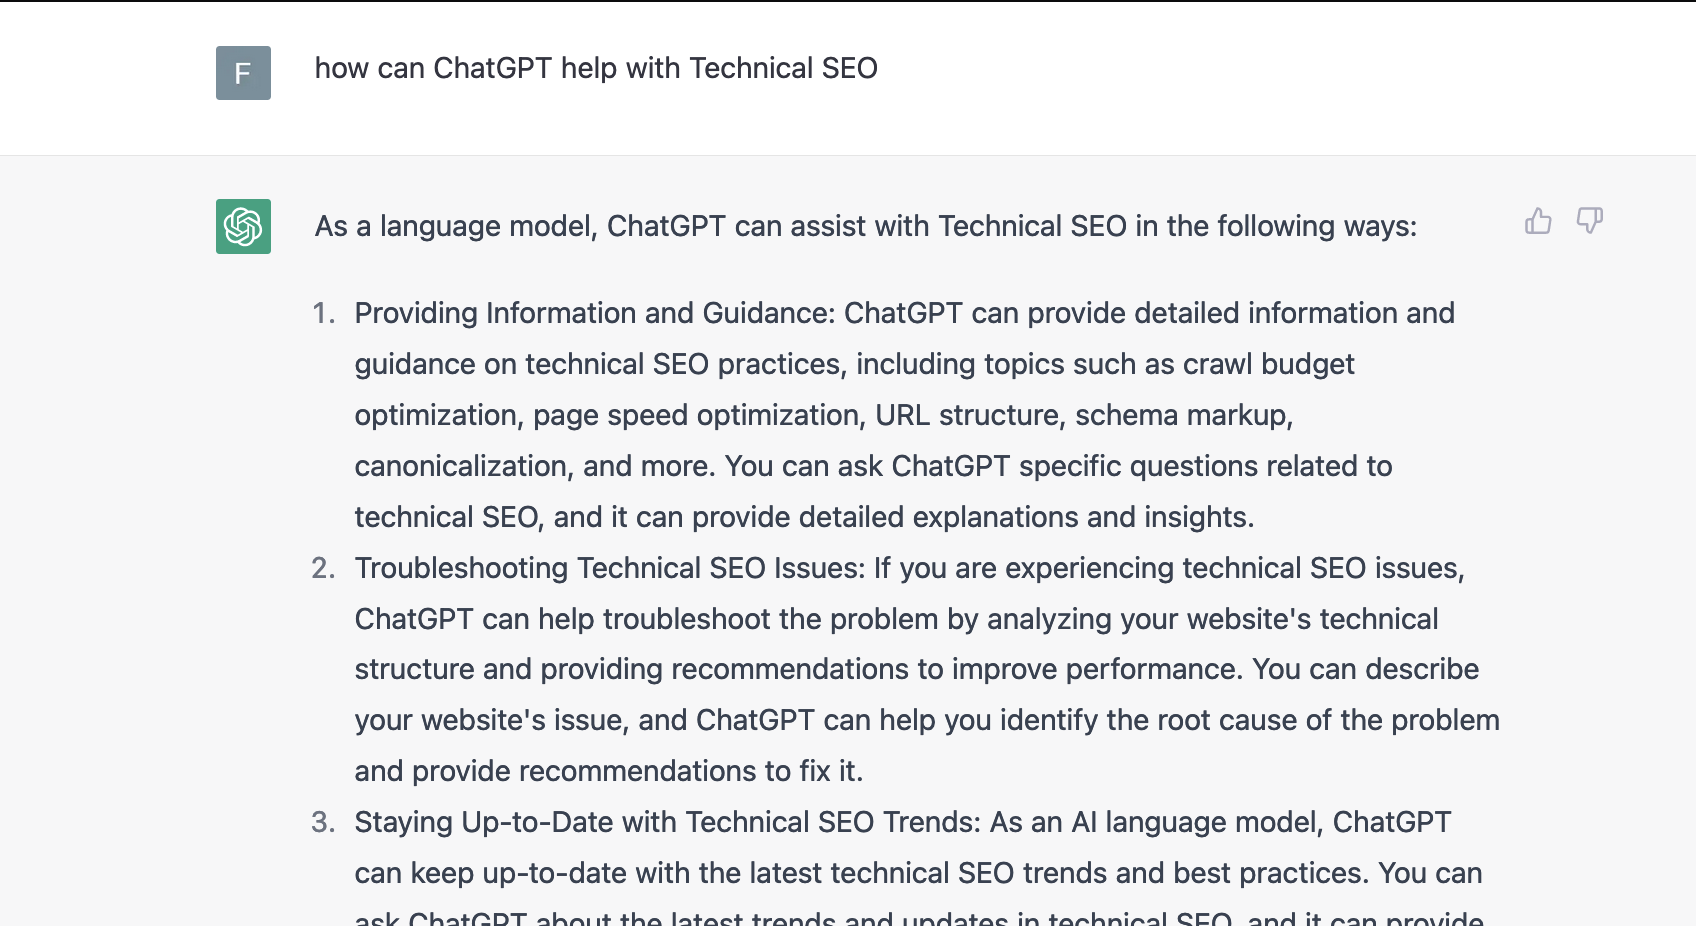 How to use ChatGPT for technical SEO